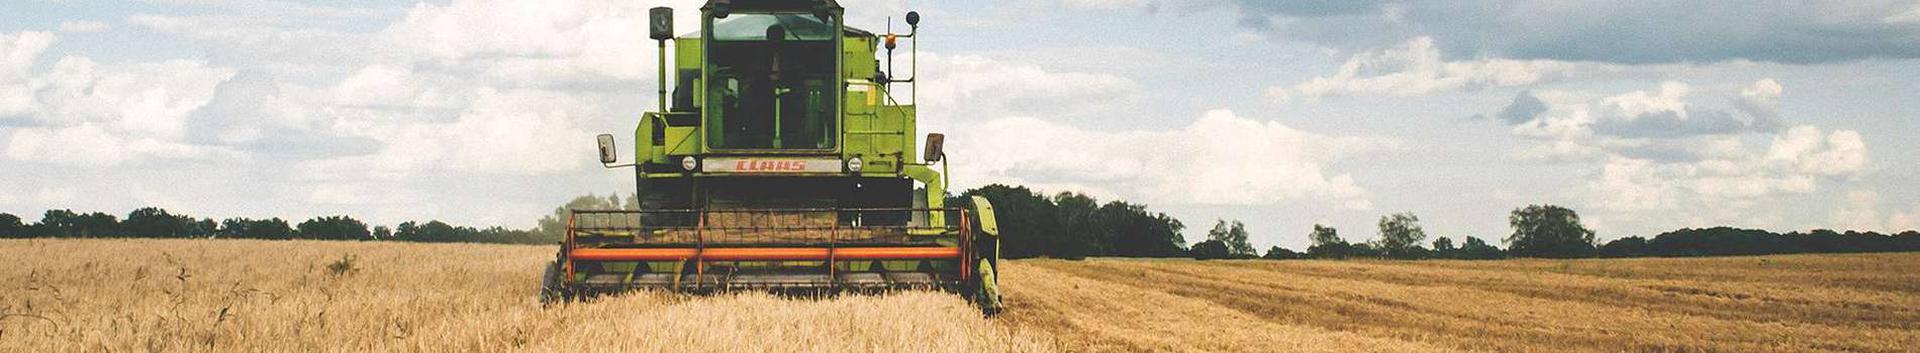 Agricultural equipment and machinery and other related services, products, consultations